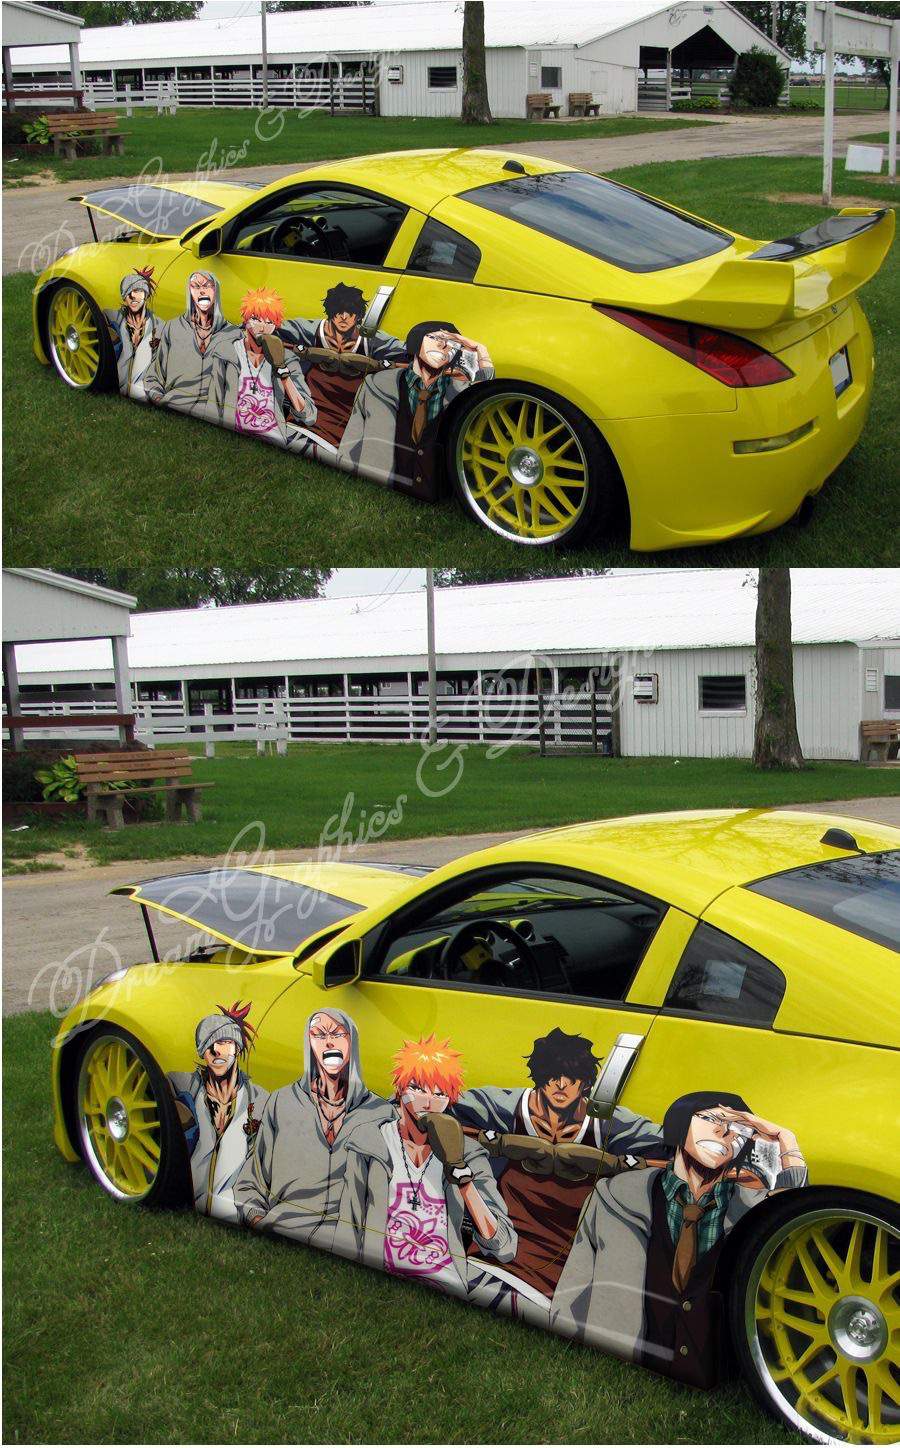 Car Anime Paint Job : It S A Wrap - And you can see photos that i took